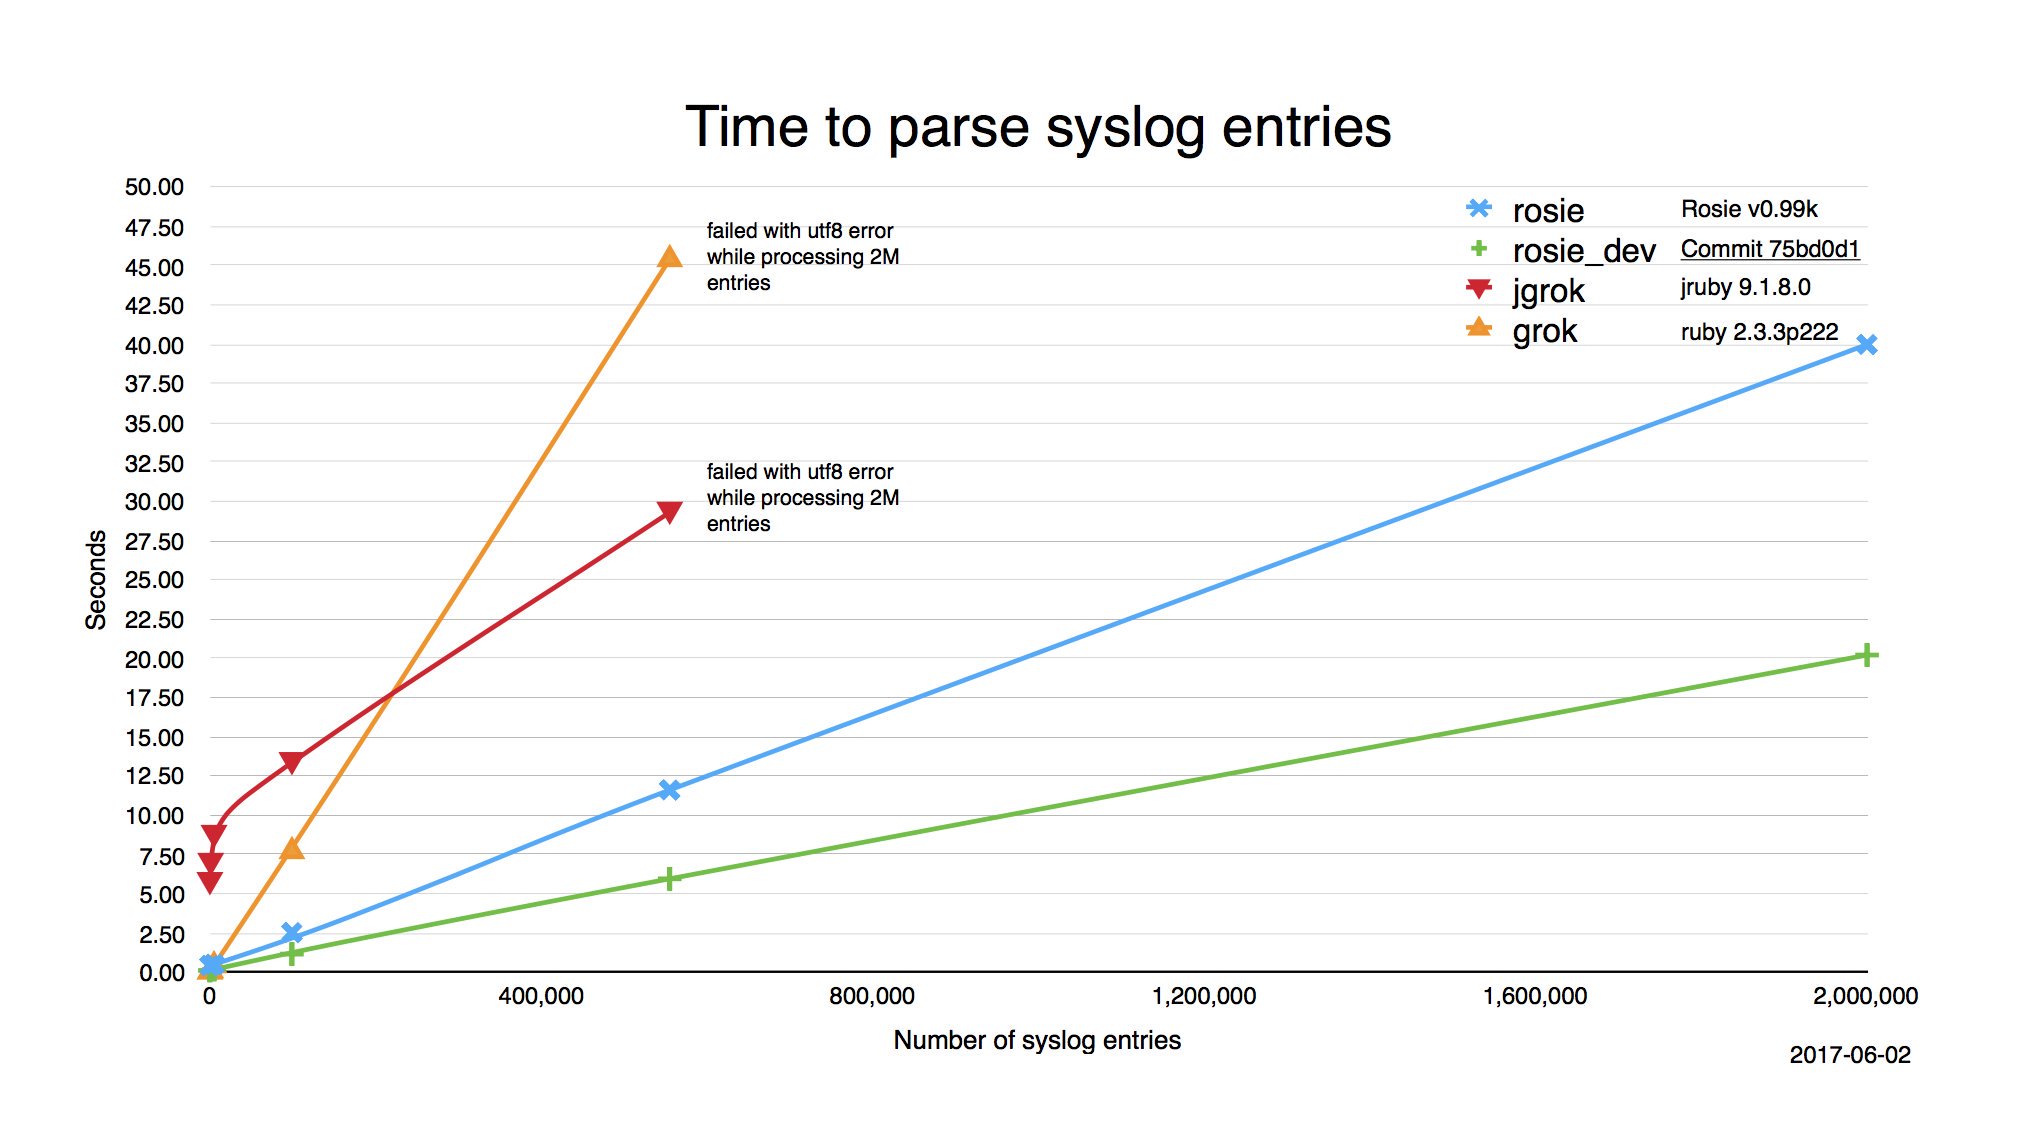 Graph of time needed to parse a varying number of log entries ranging from around 50 thousand to 2 million.